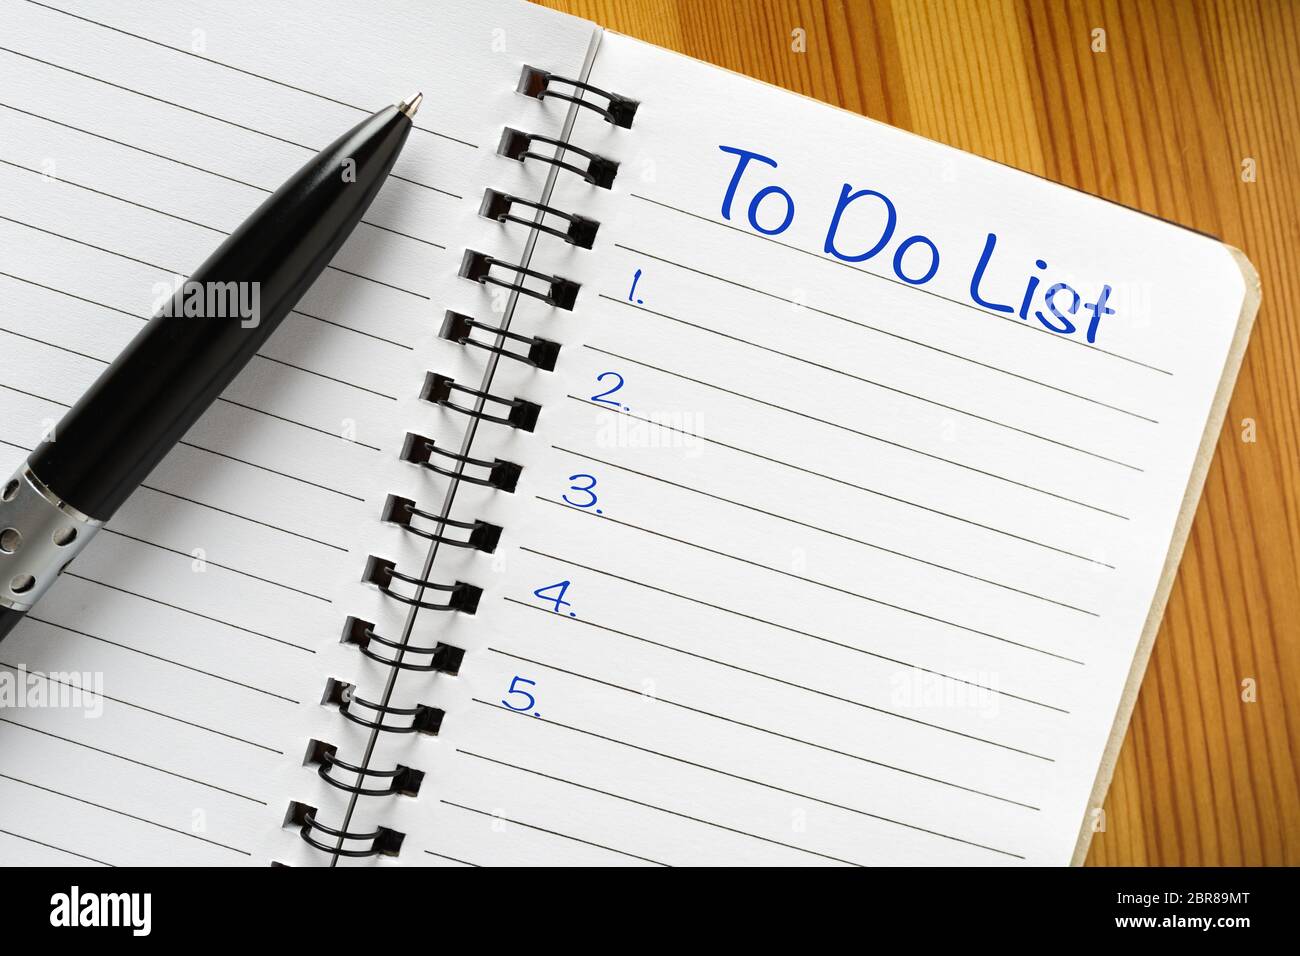 To do list with 5 items. Stock Photo